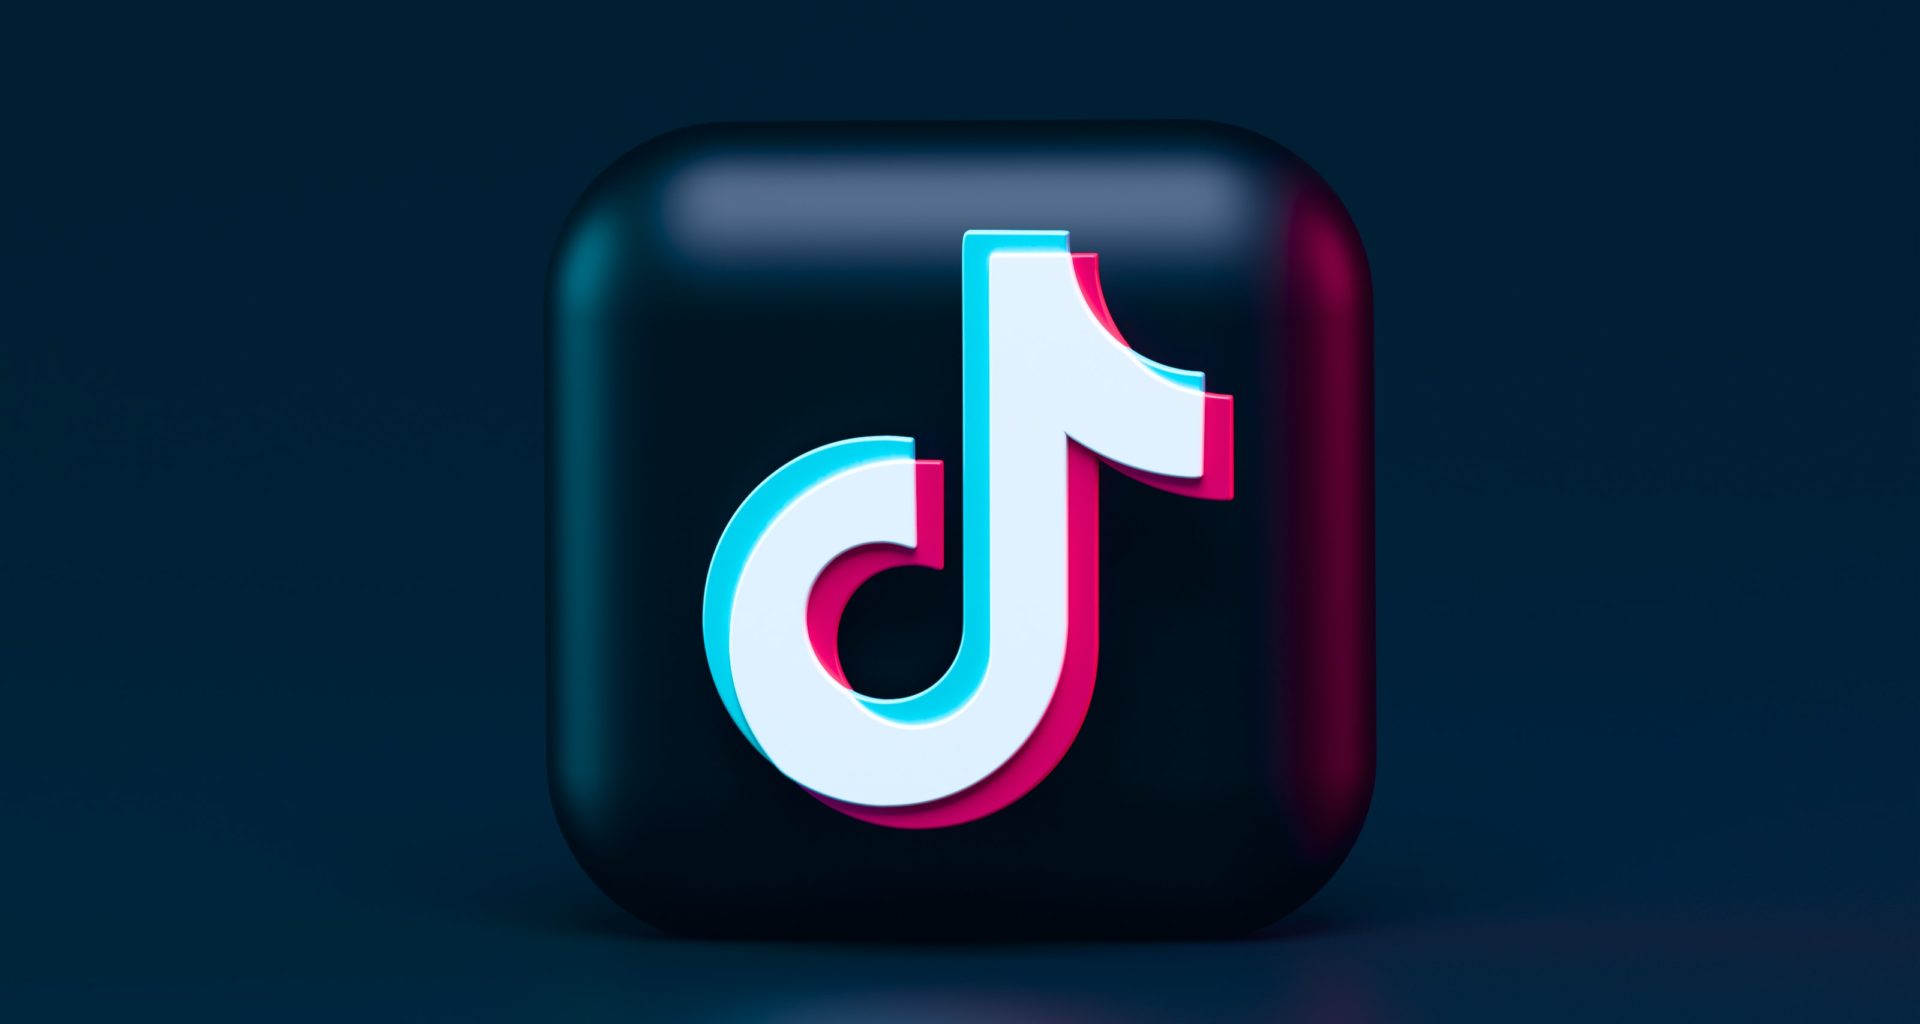 Tiktok is cautioned about advertising for children